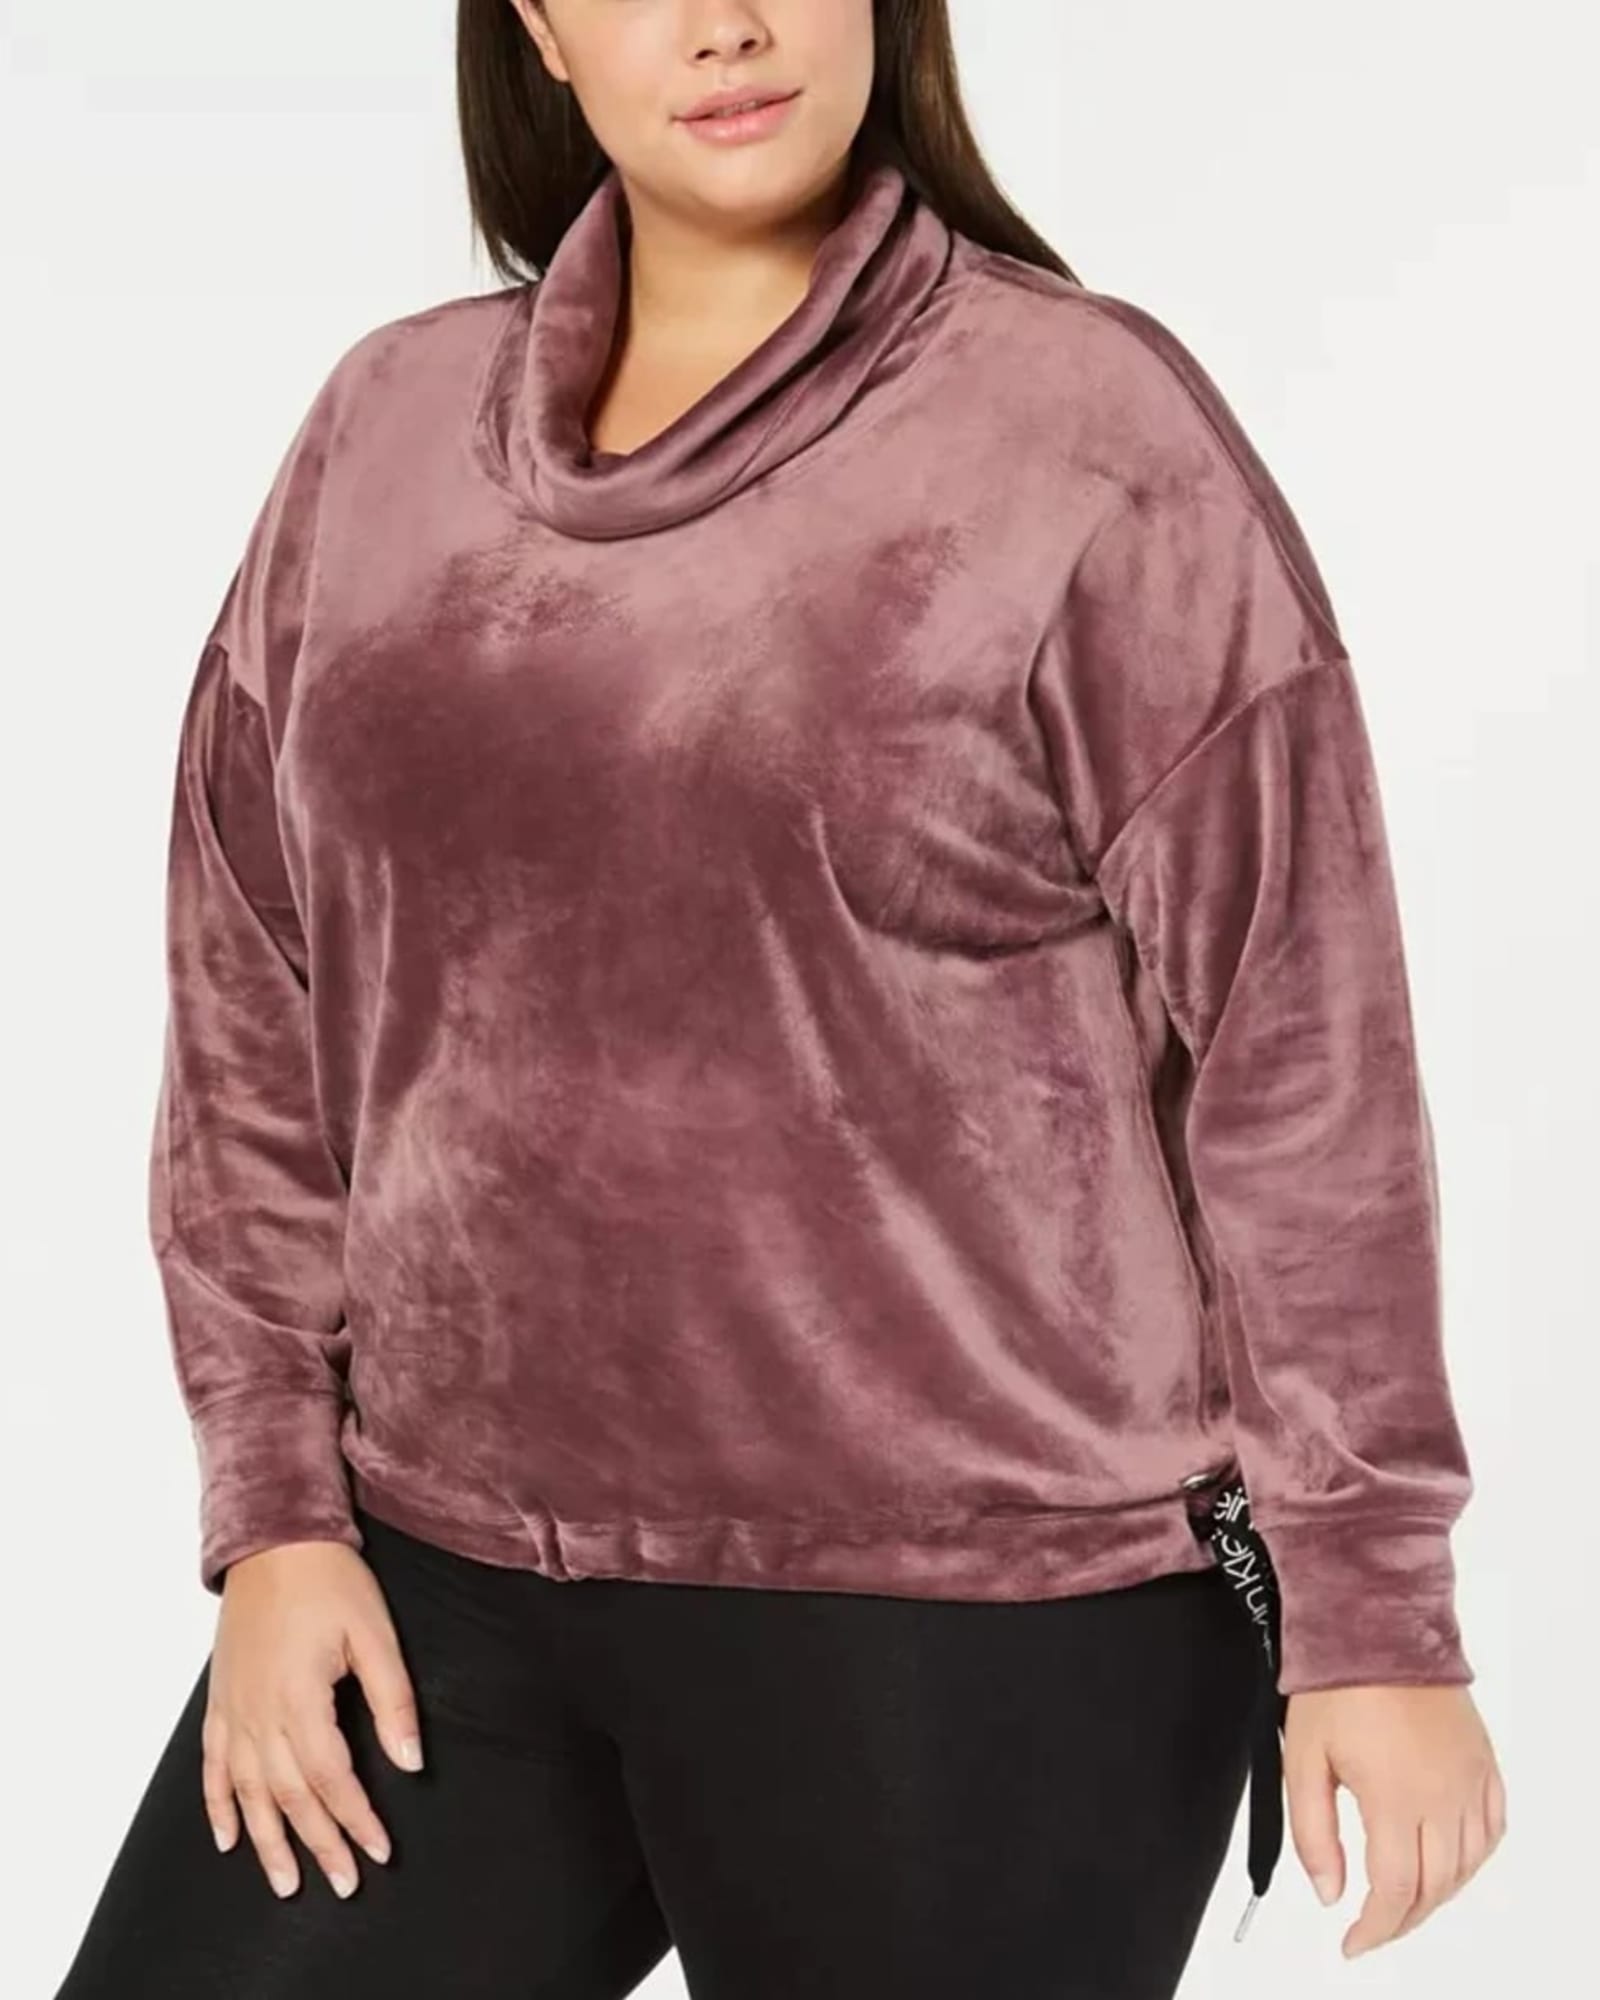 Plus Size Casual Tops